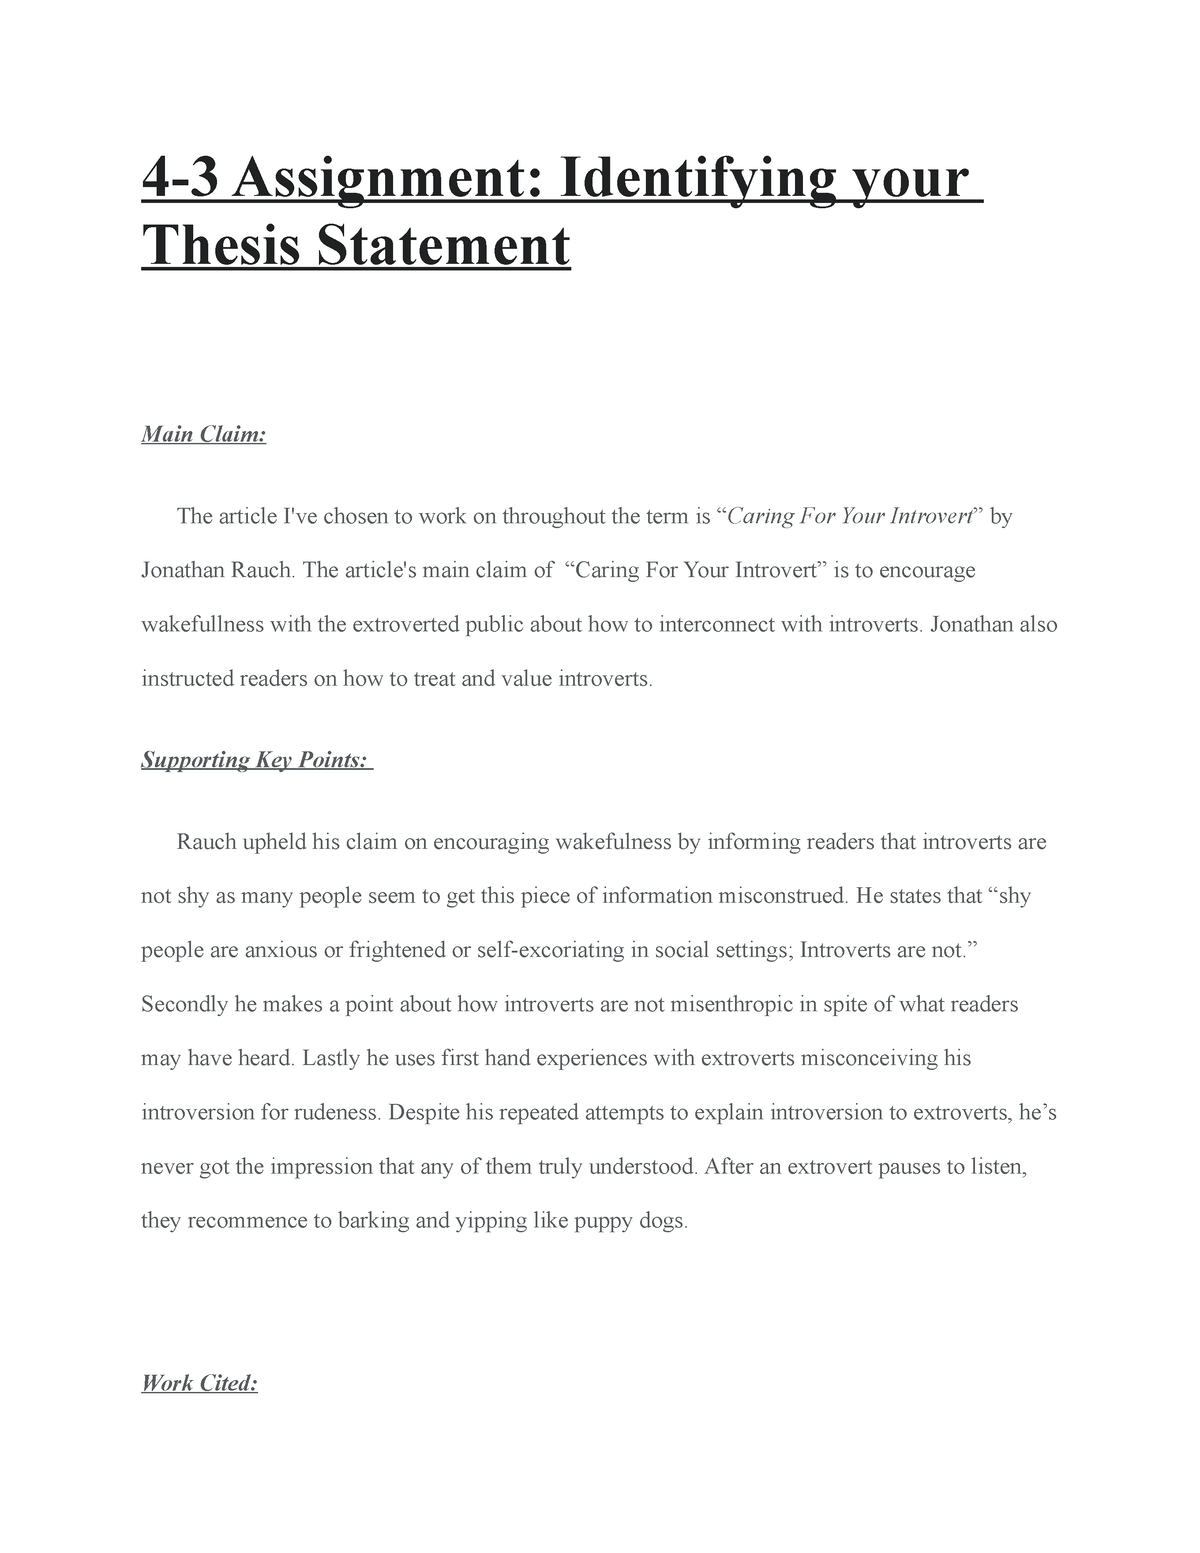 4 3 identifying your thesis statement